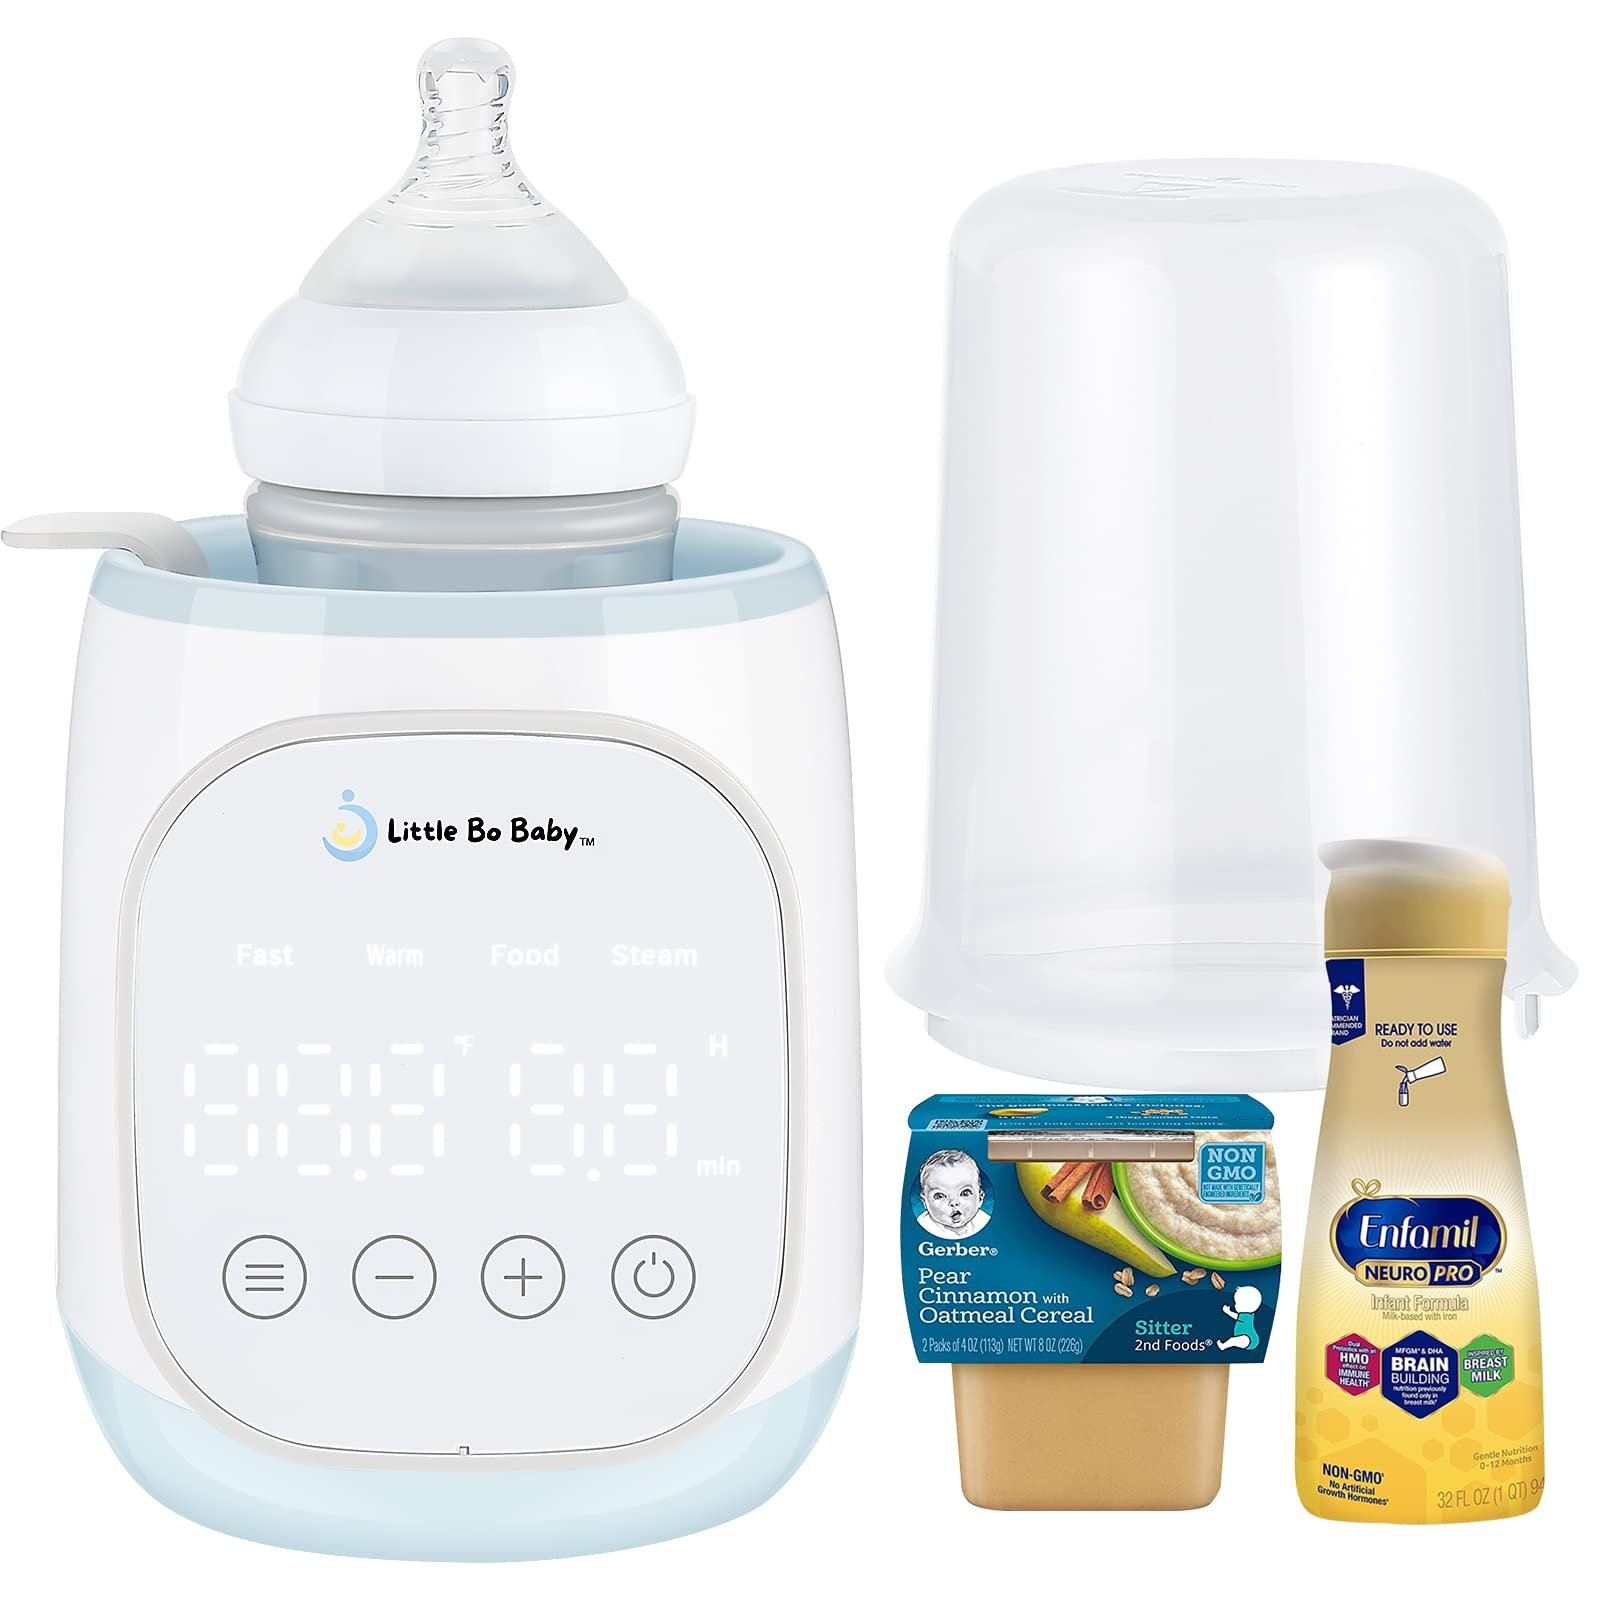 How to Warm a Baby Bottle? 4 Easy Ways To Do It!